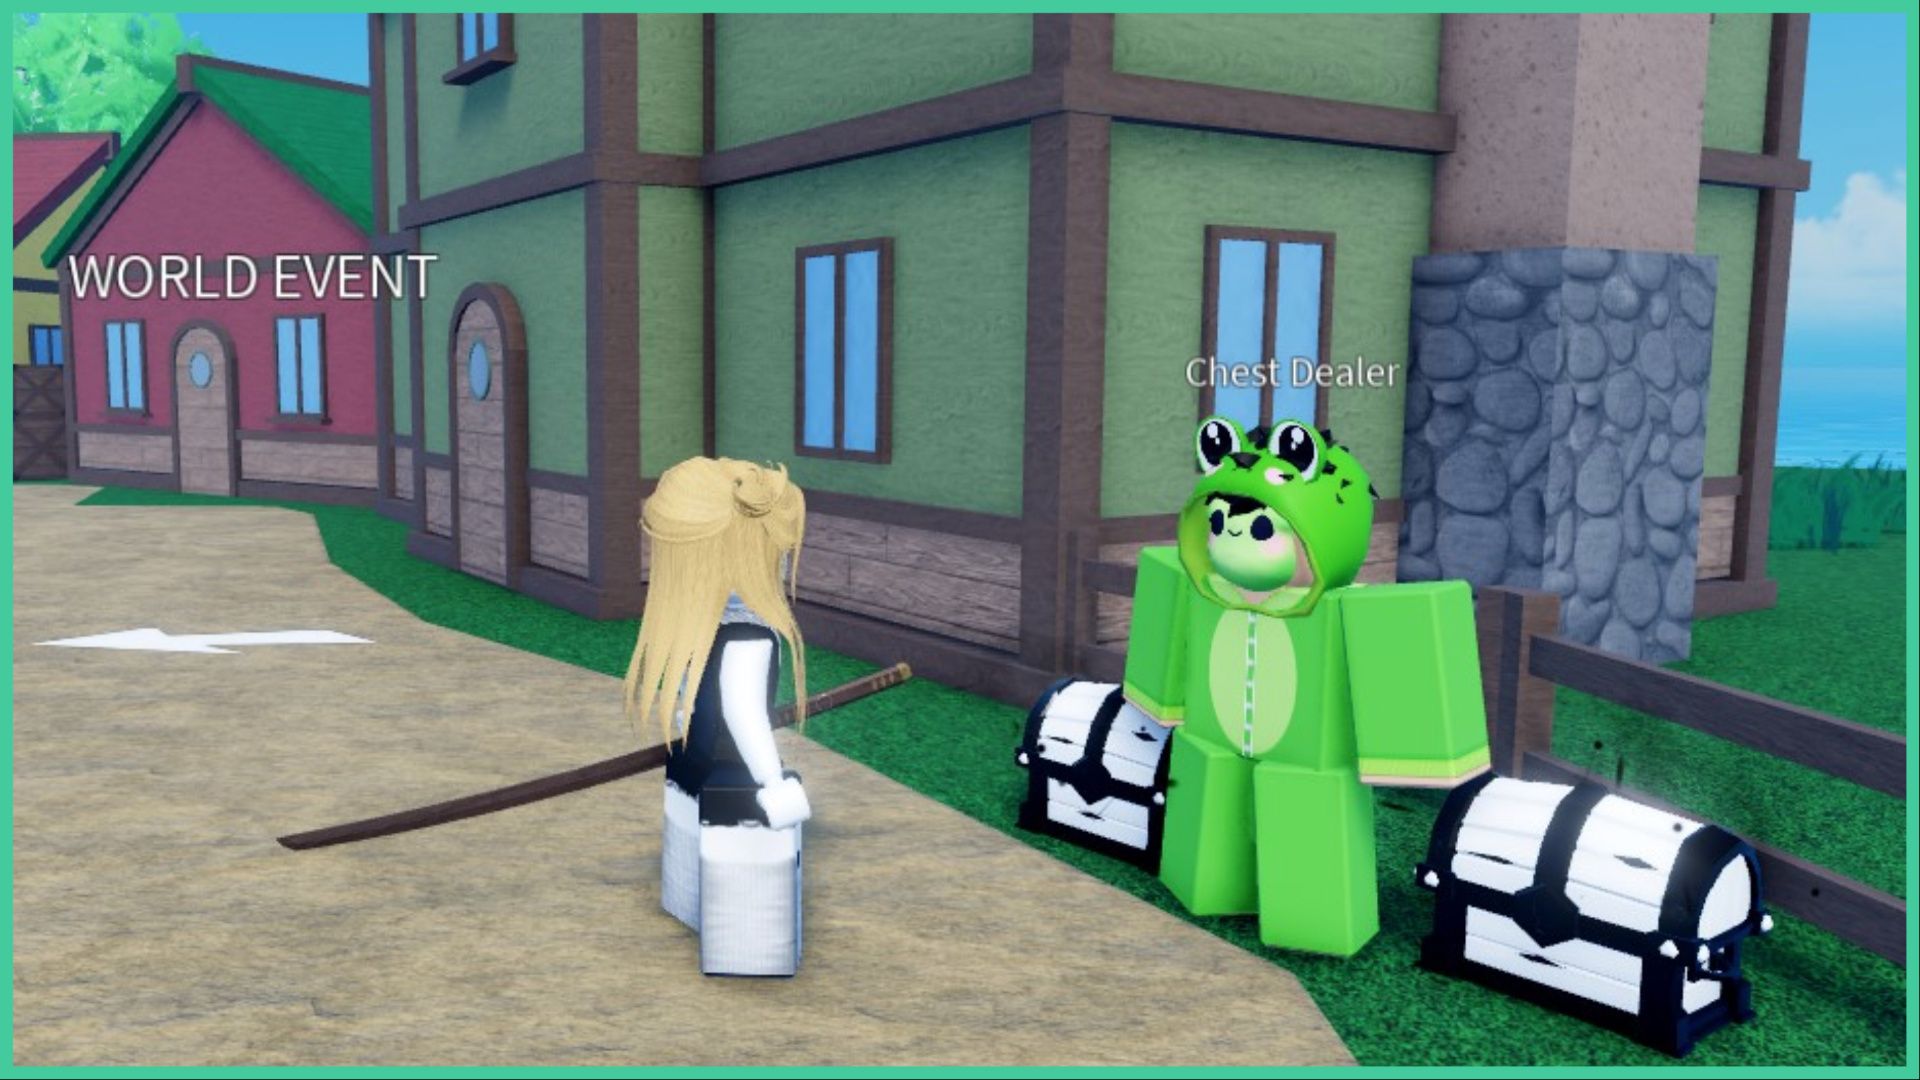 feature image for our cursed sea races guide, the image features a screenshot from the game of a blonde roblox player standing in front of the frog NPC who has two chests on either side of them by some buildings on a dirt path, you can see the ocean stretch out in the distance